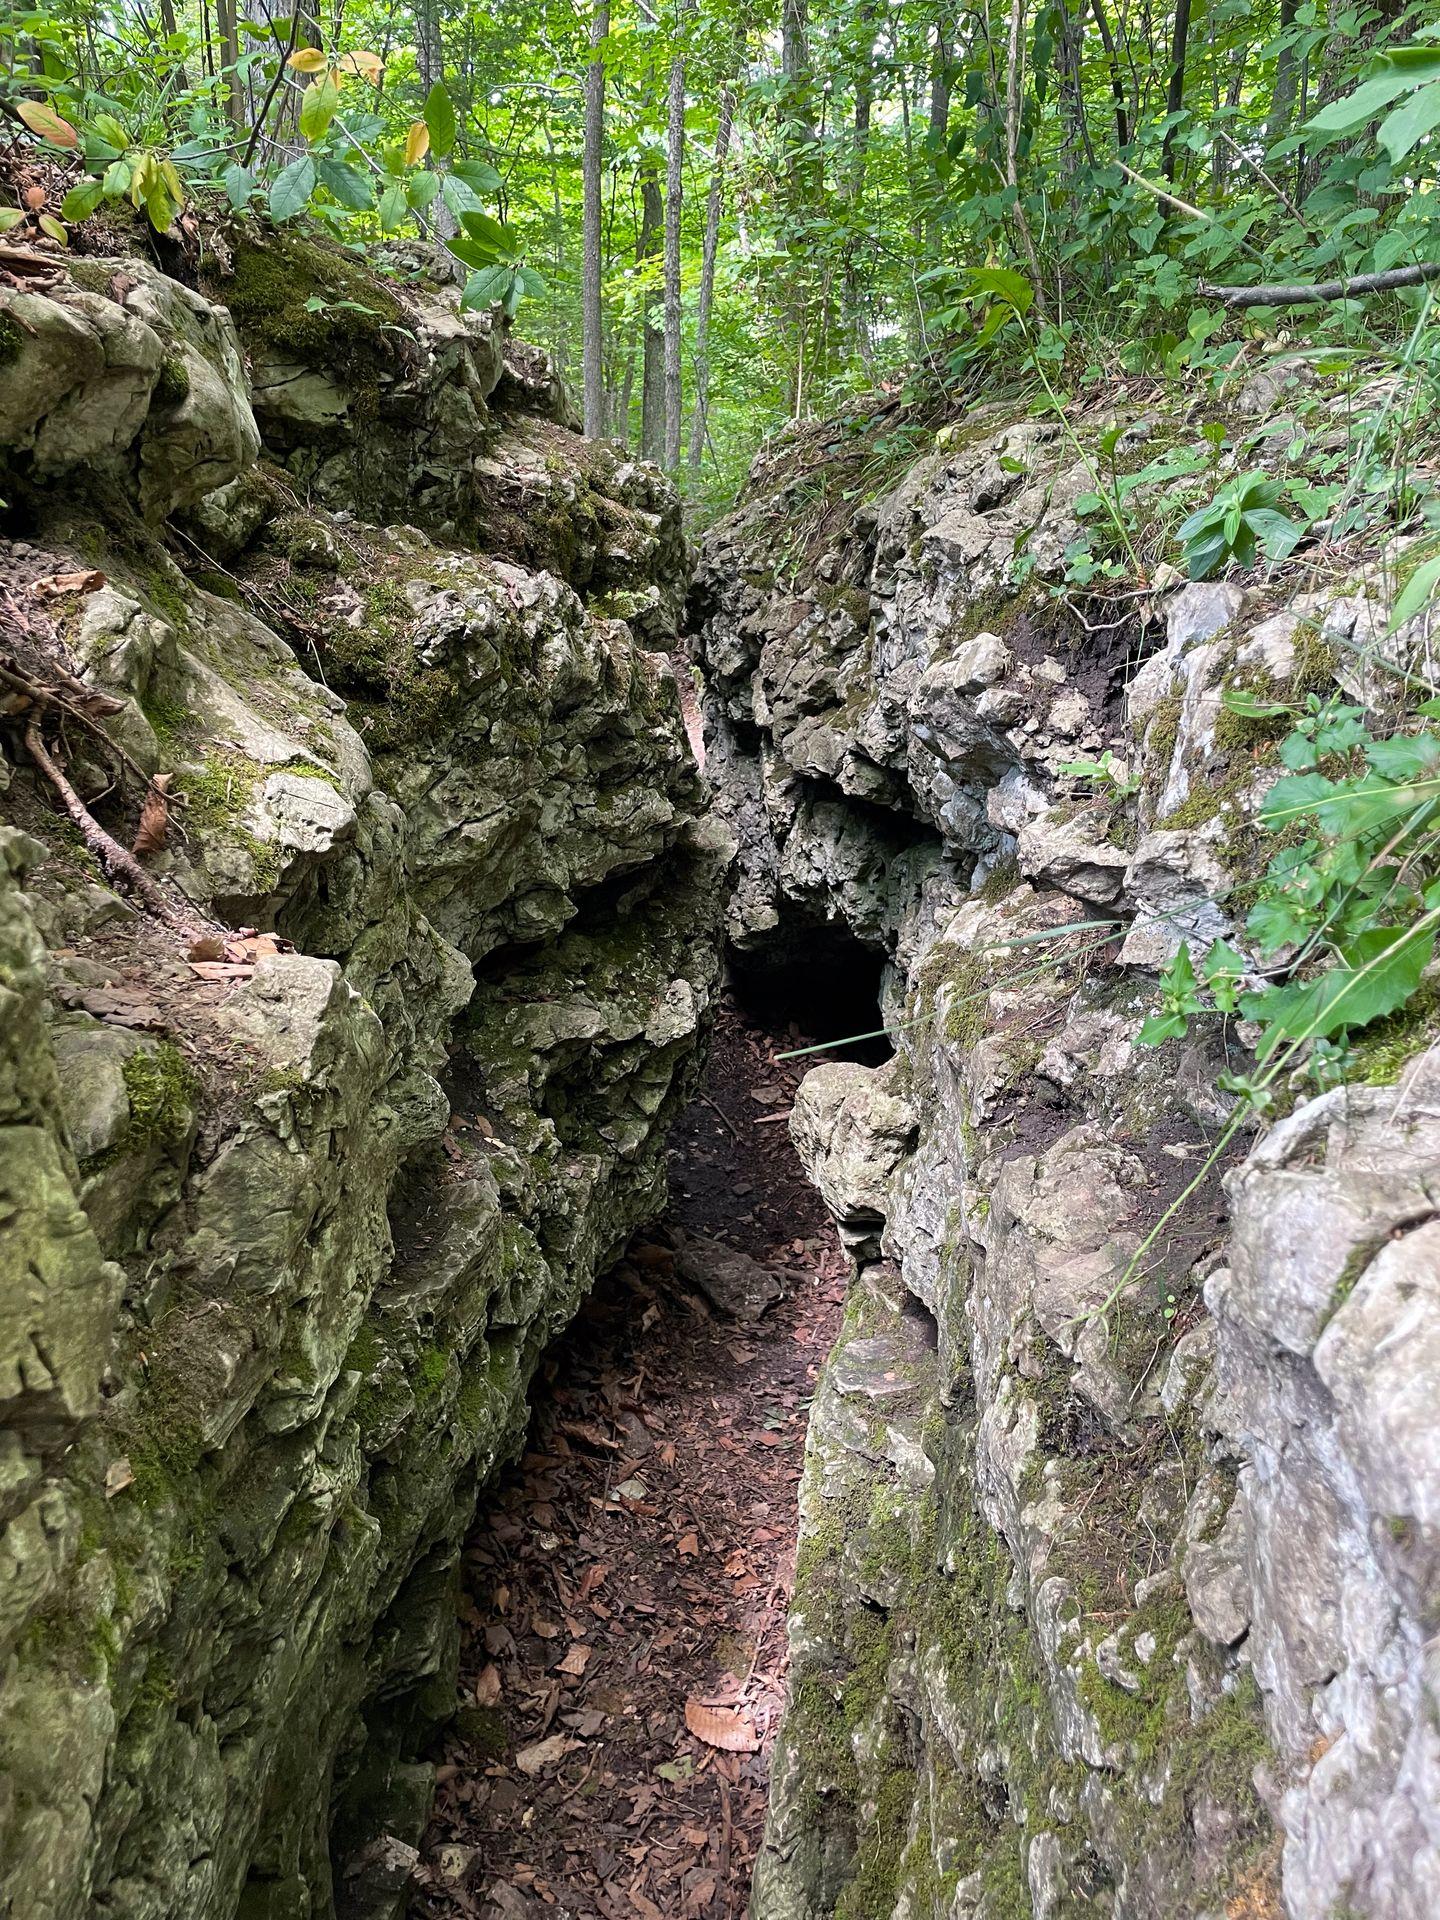 Looking through a narrow area of rocks that almost touch.